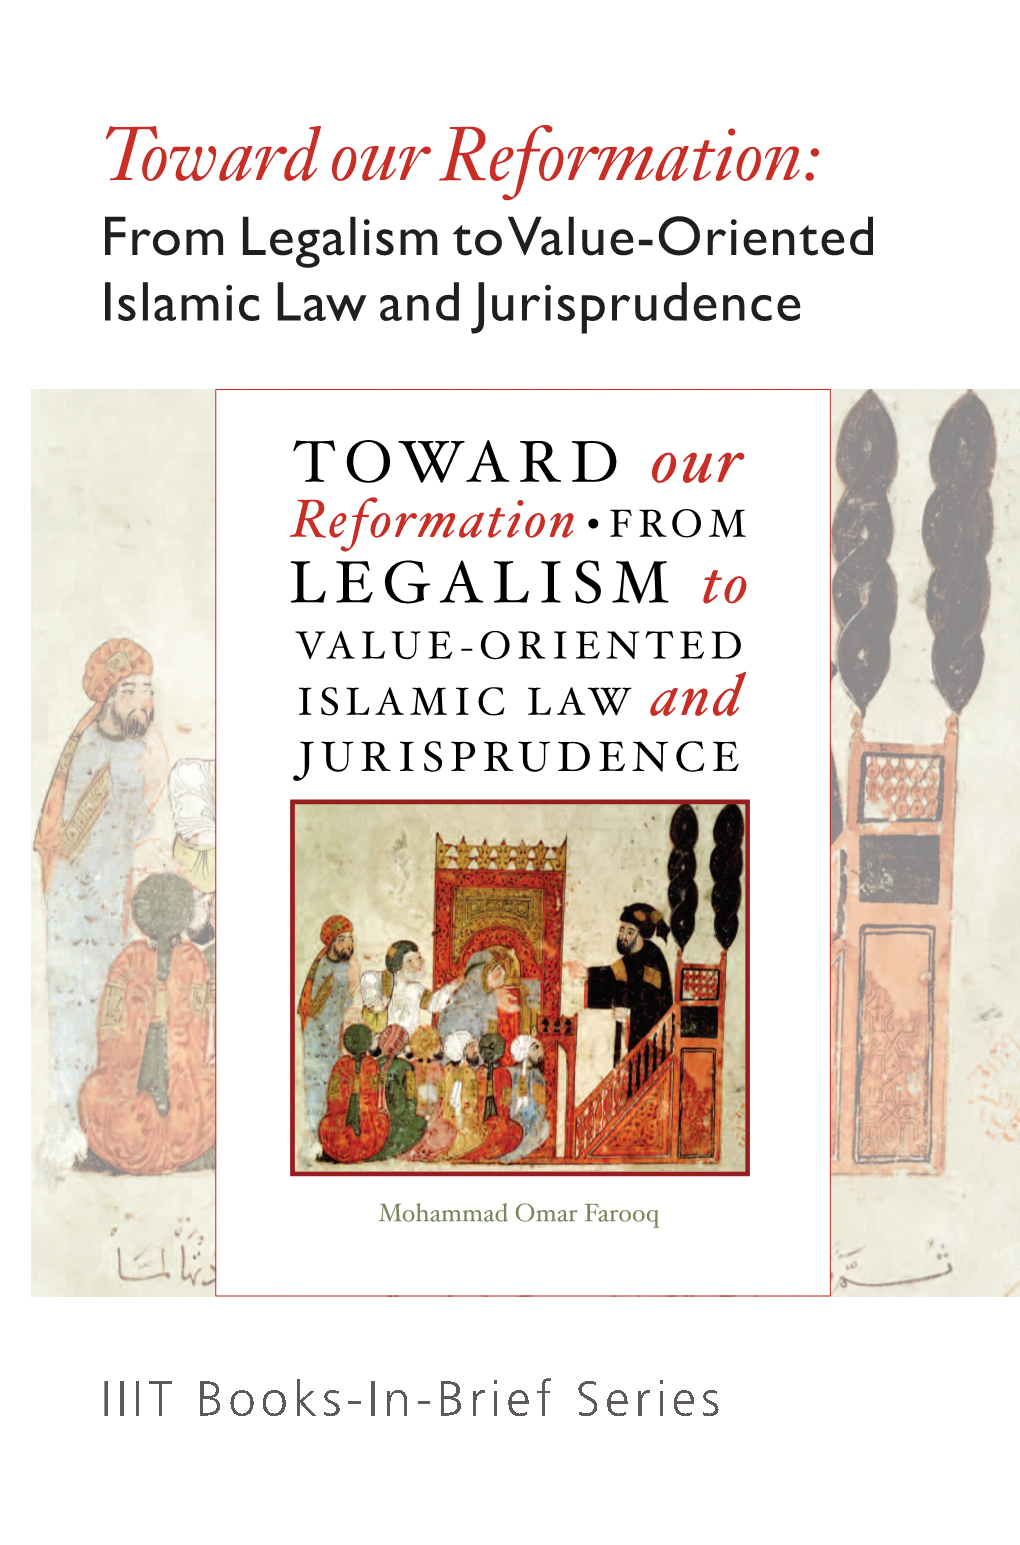 Toward Reformation: from Legalism to Value-Oriented Islamic Law And